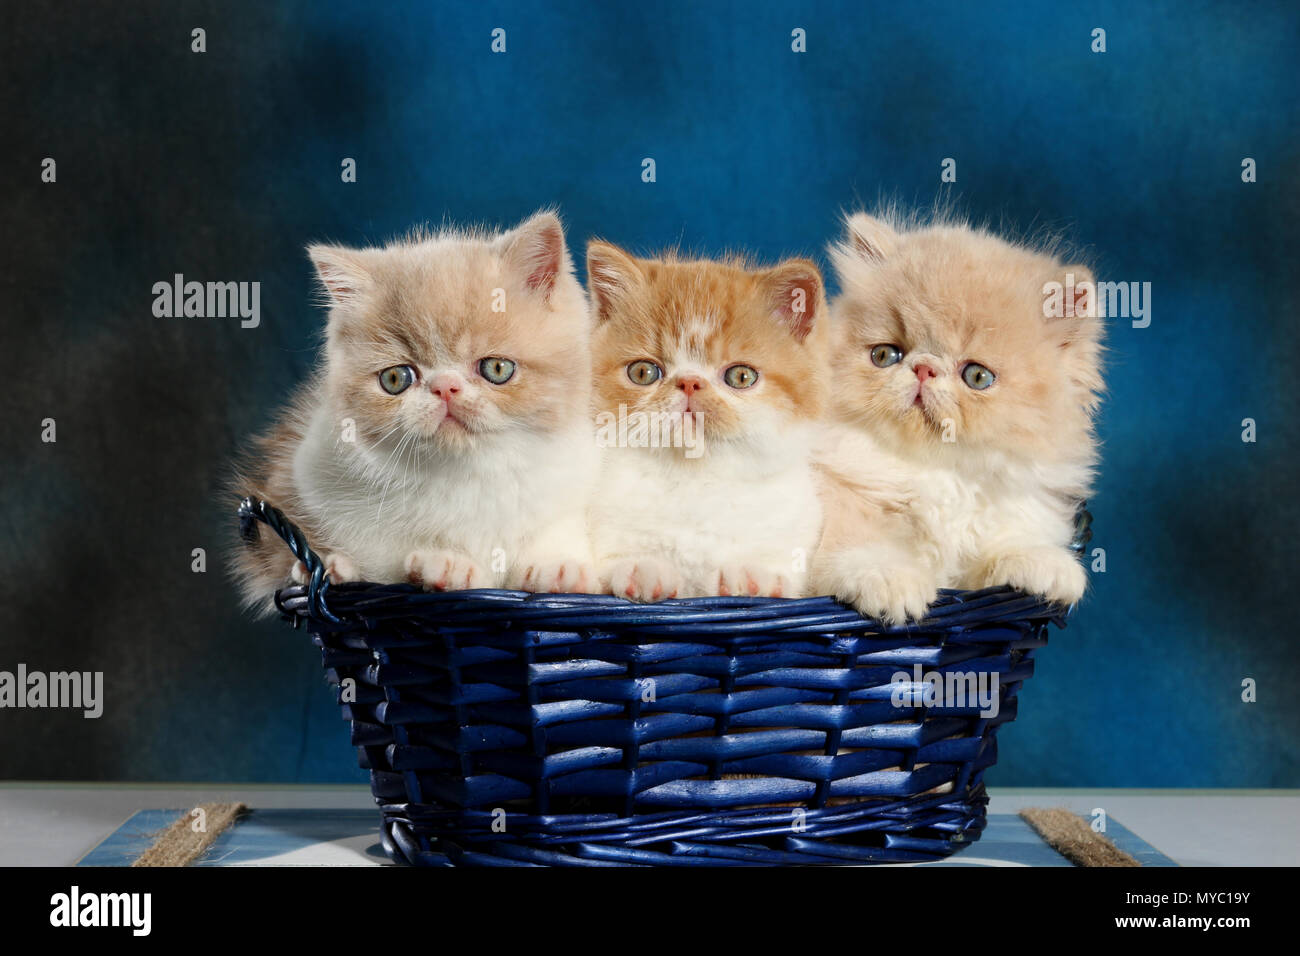 2 exotic shorthair kittens and 1 persian kitten sitting in a blue basket  Stock Photo - Alamy